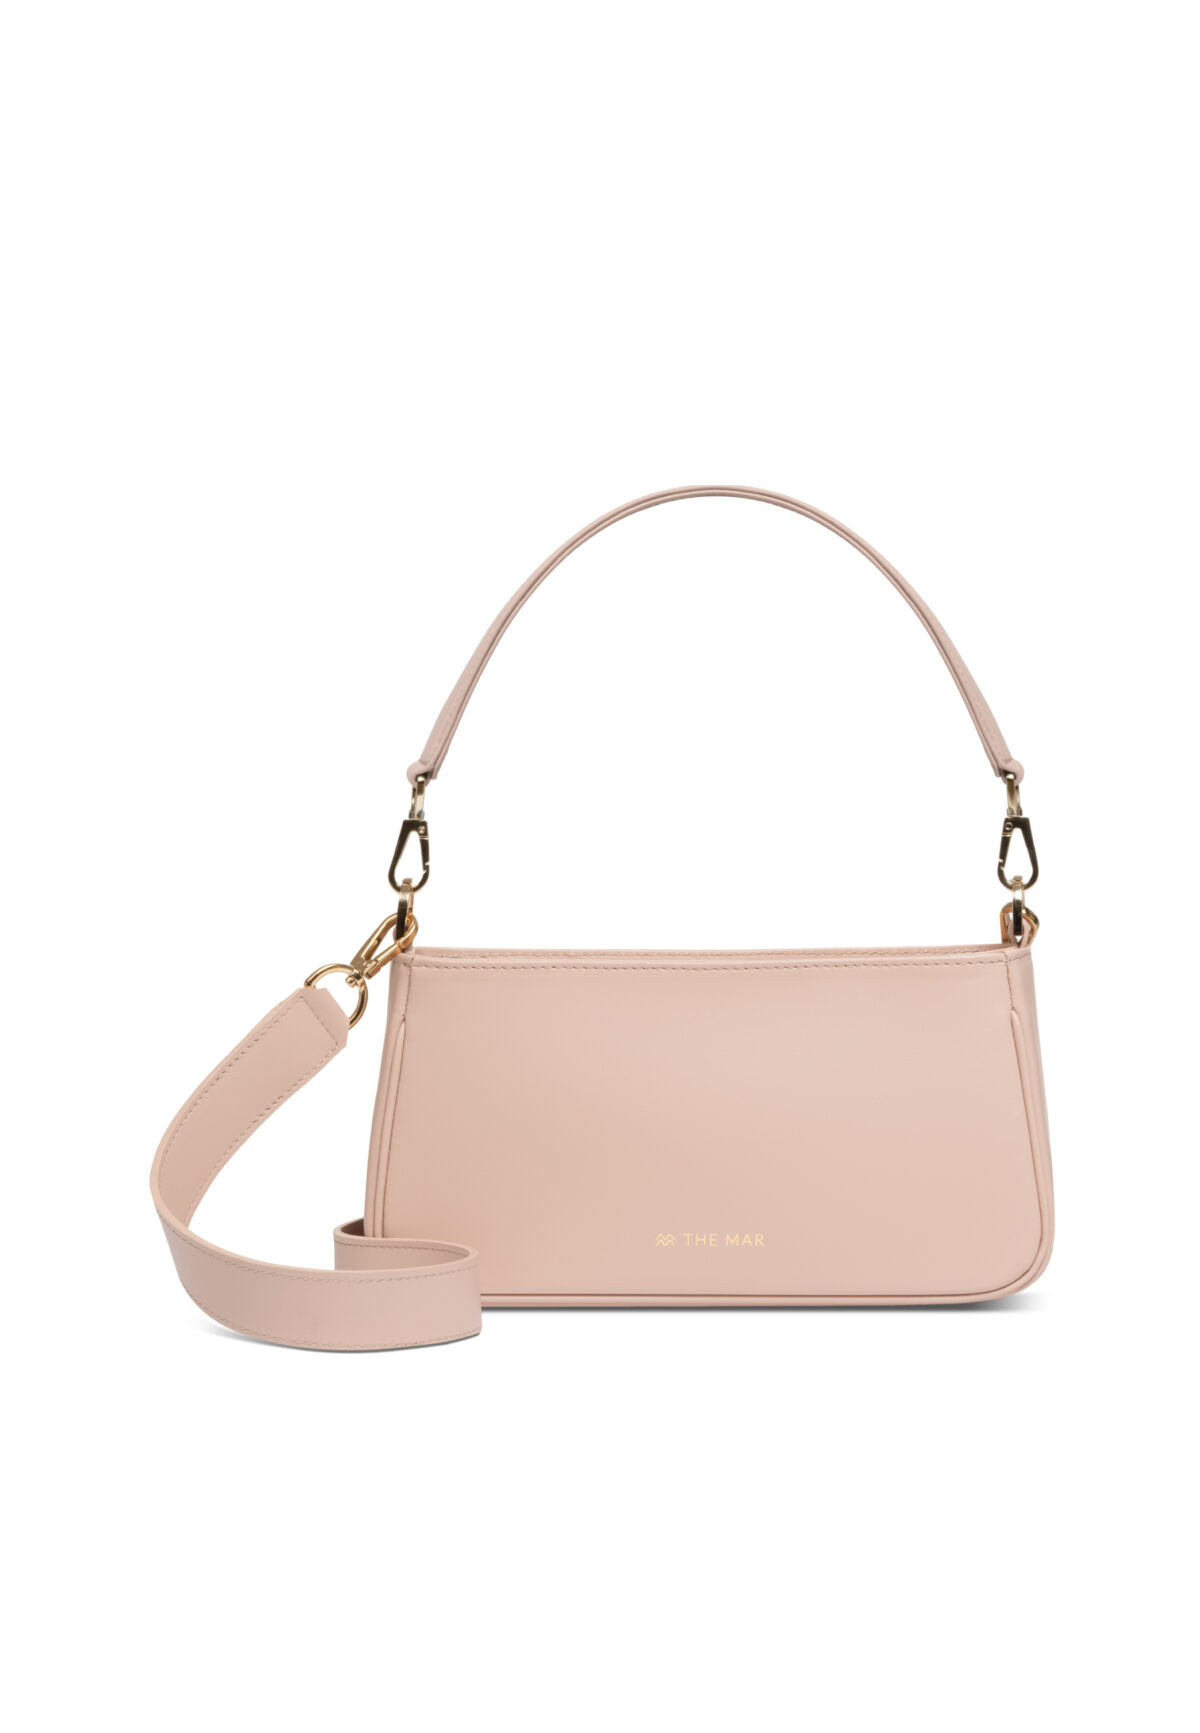 BELLONA BAG NUDE OUTLET